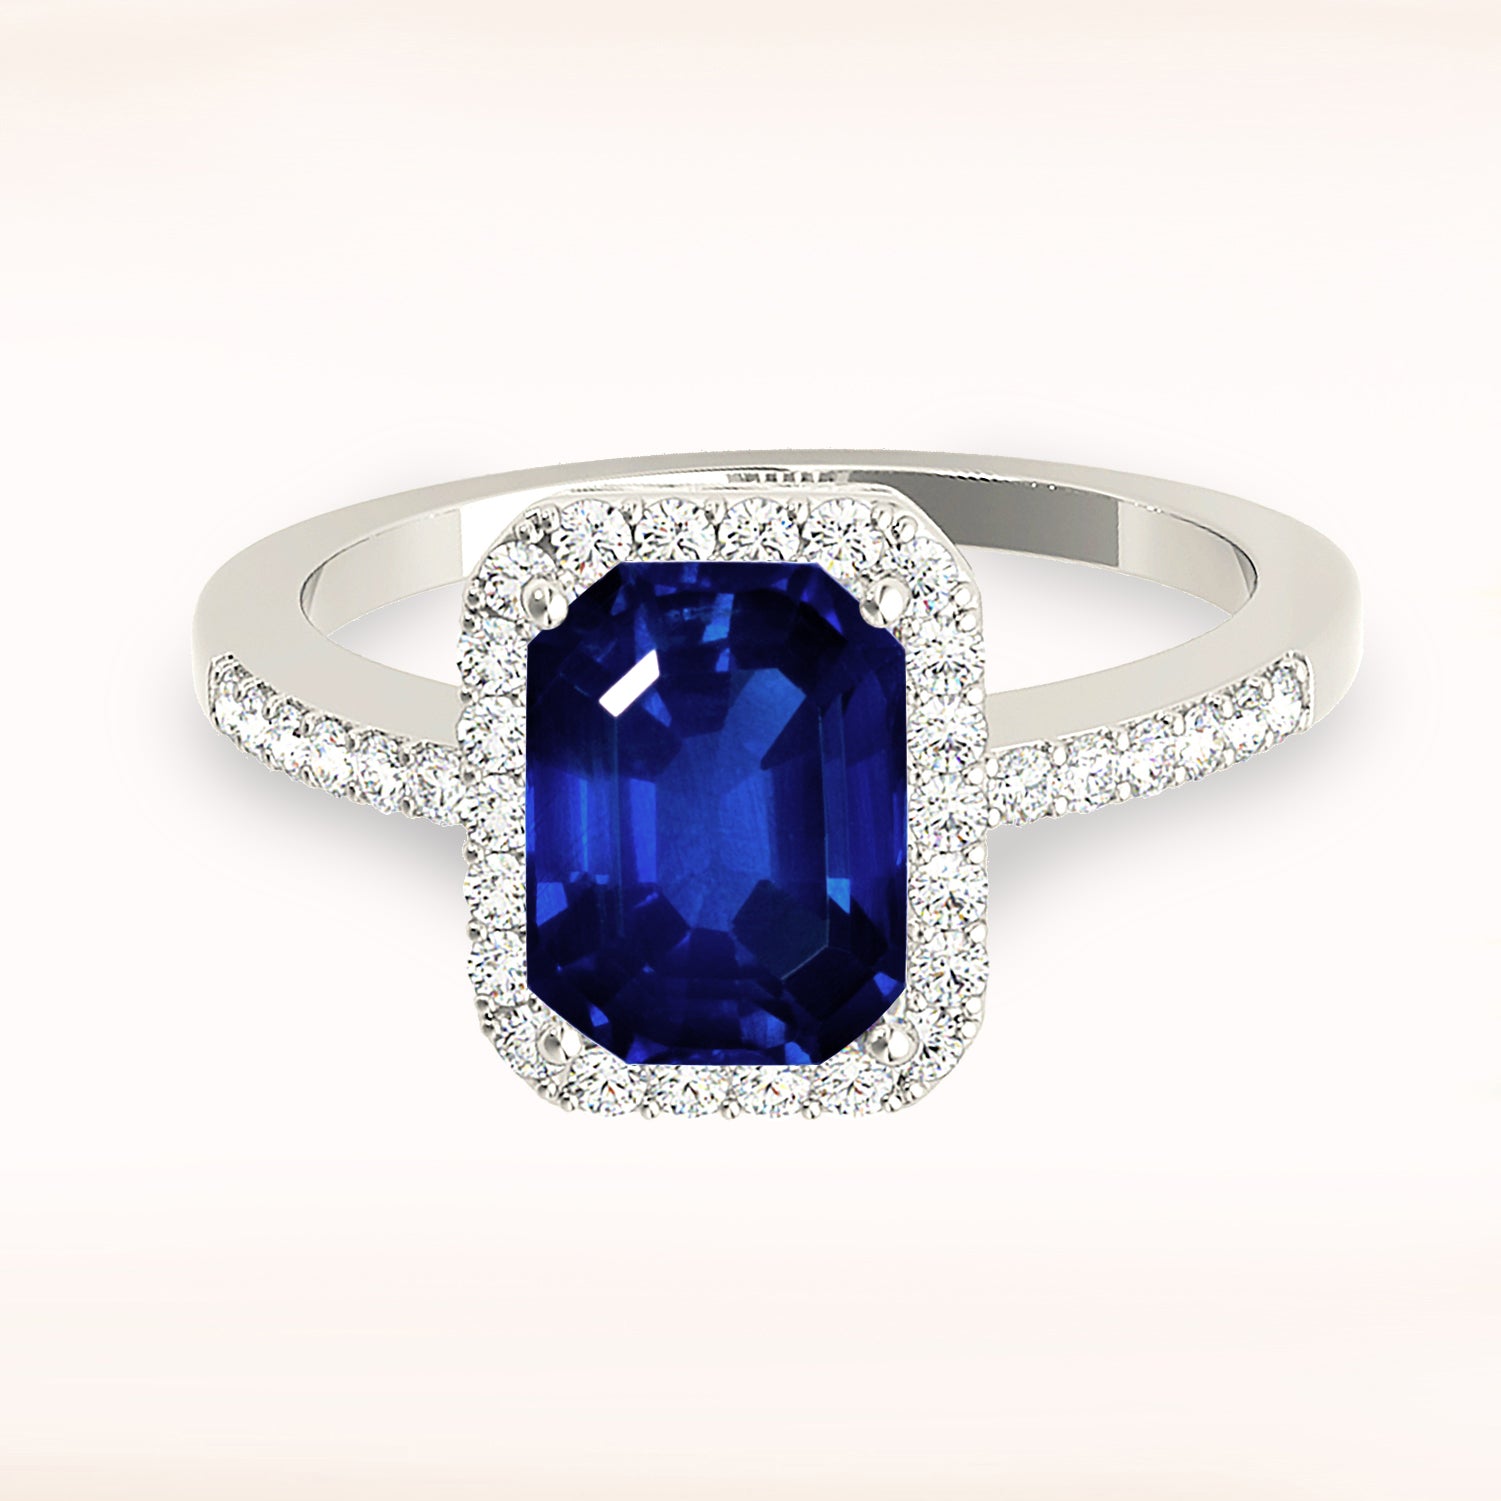 2.30 ct. Genuine Blue, Emerald Cut Sapphire Ring With 0.25 ctw. Diamond Halo, Delicate Diamond Band | Natural Sapphire And Diamond Ring-in 14K/18K White, Yellow, Rose Gold and Platinum - Christmas Jewelry Gift -VIRABYANI